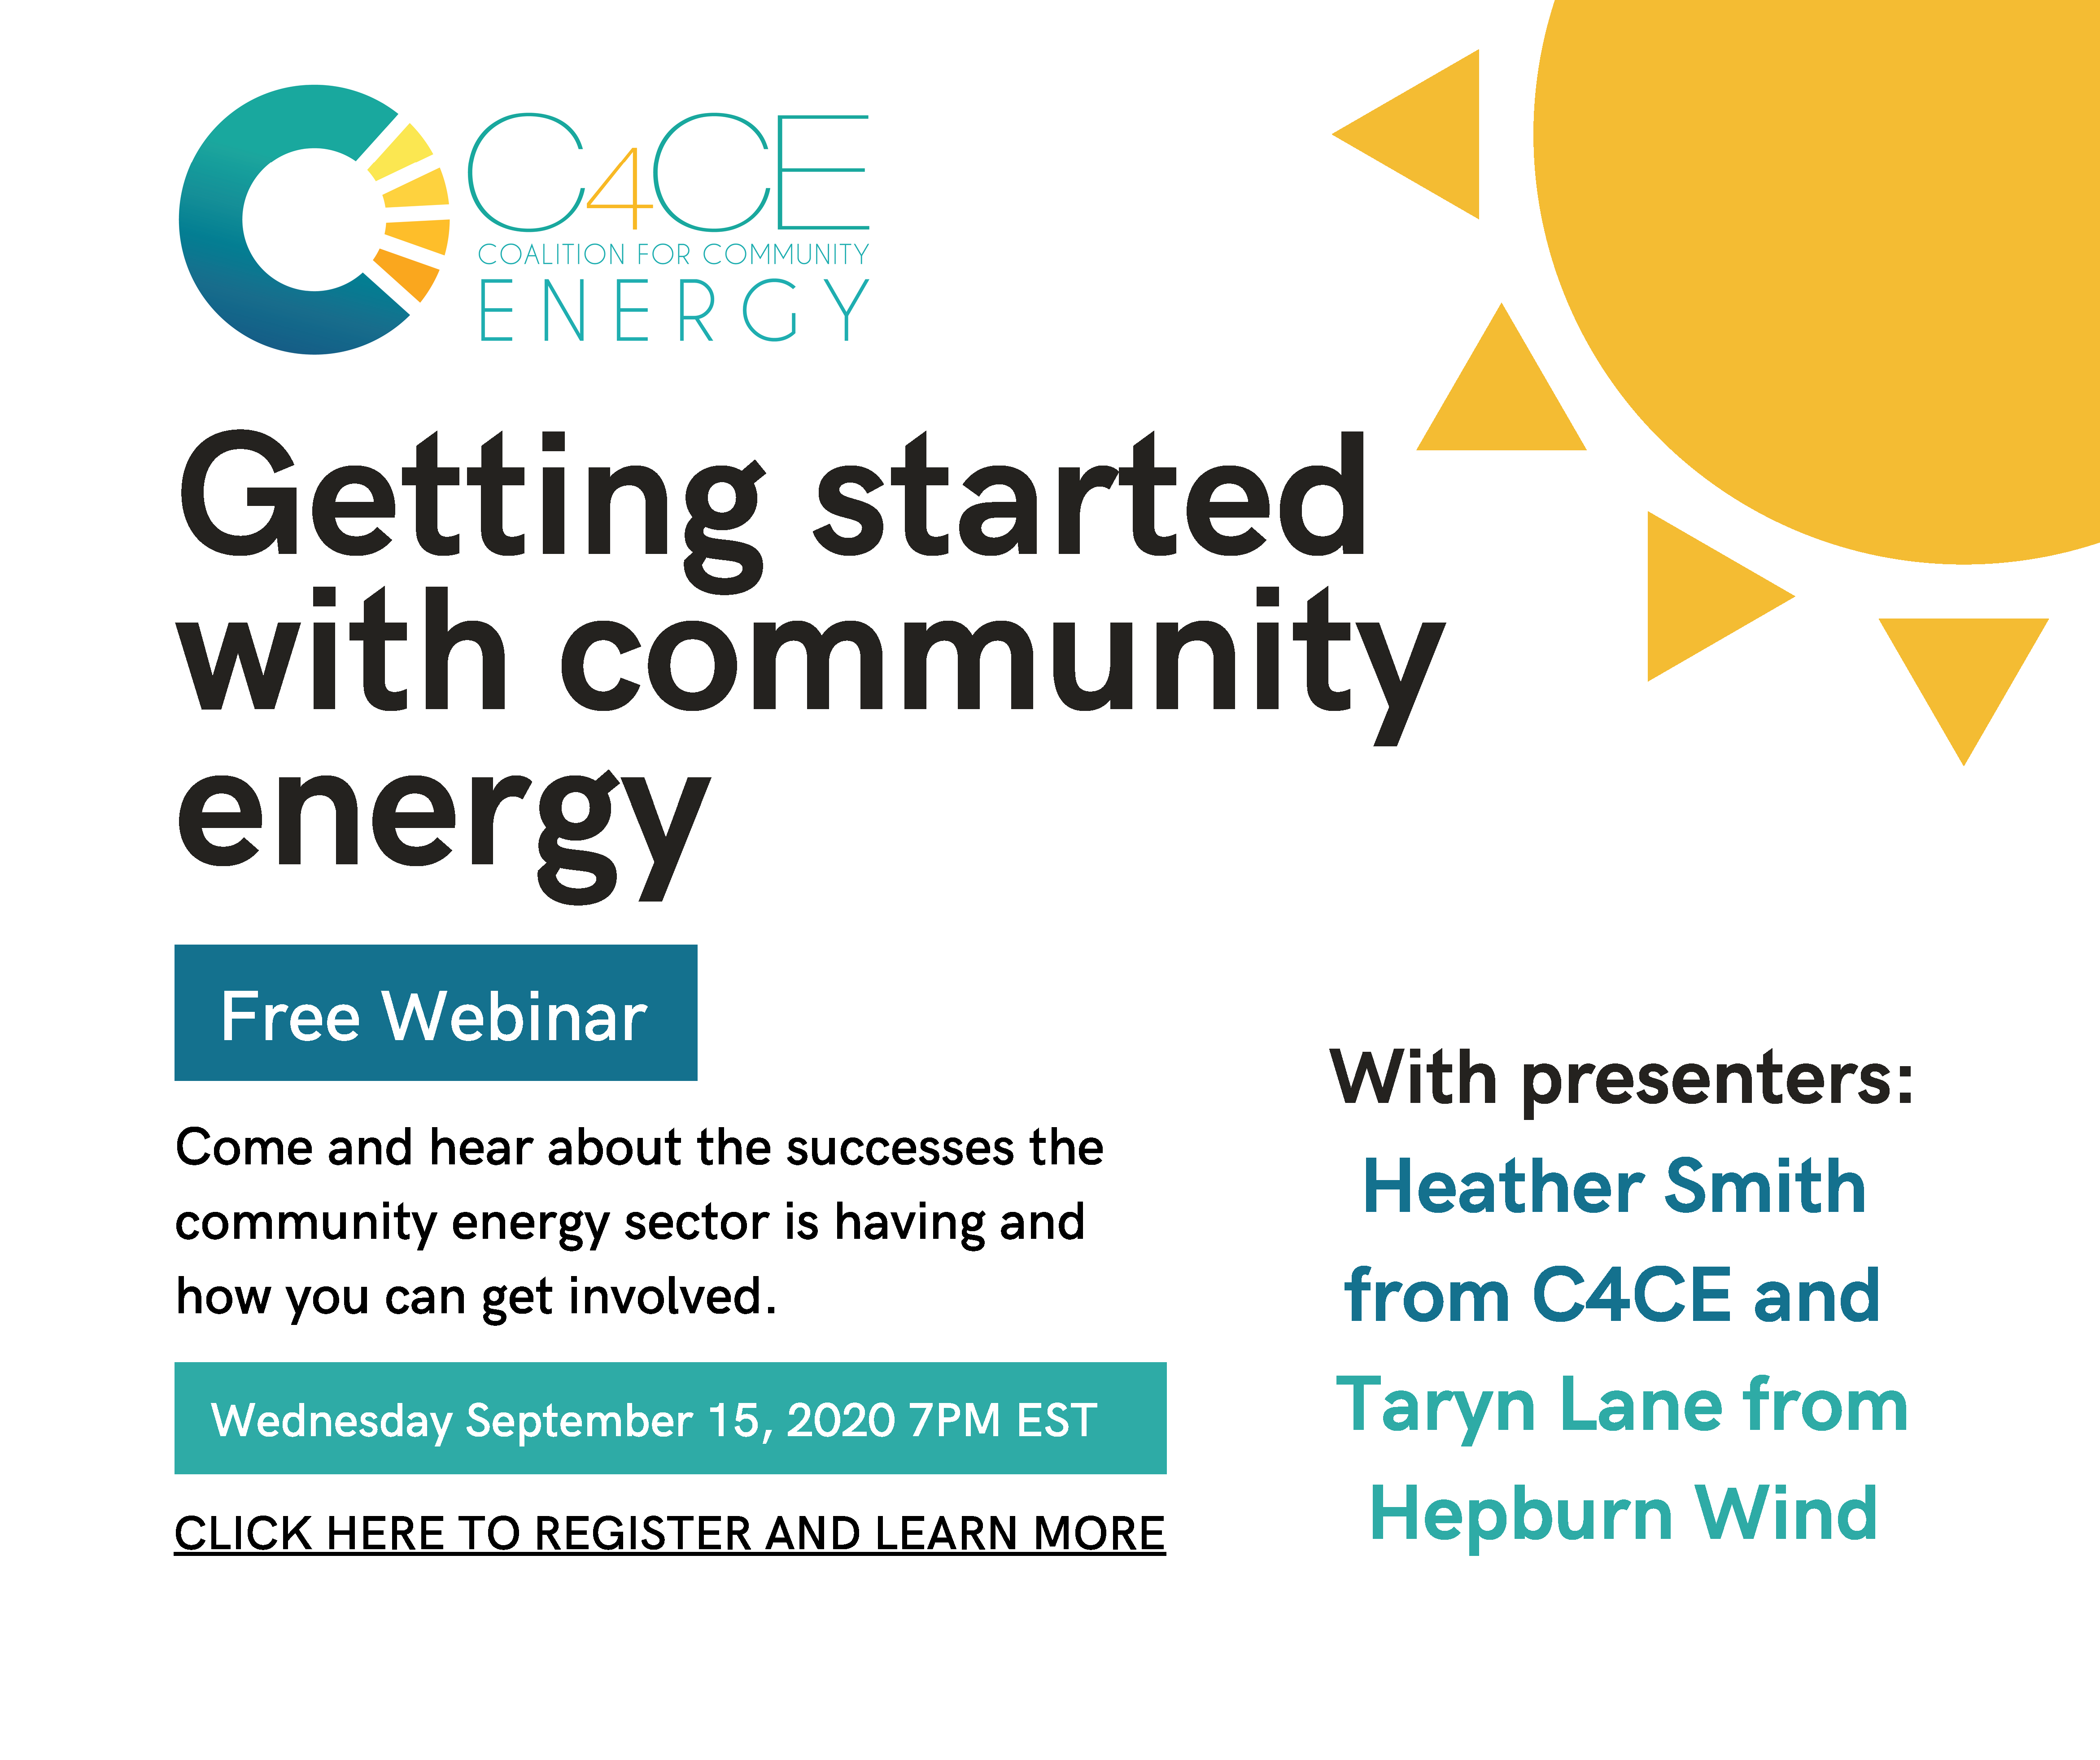 Free webinar to be held on Wed Sept 15th